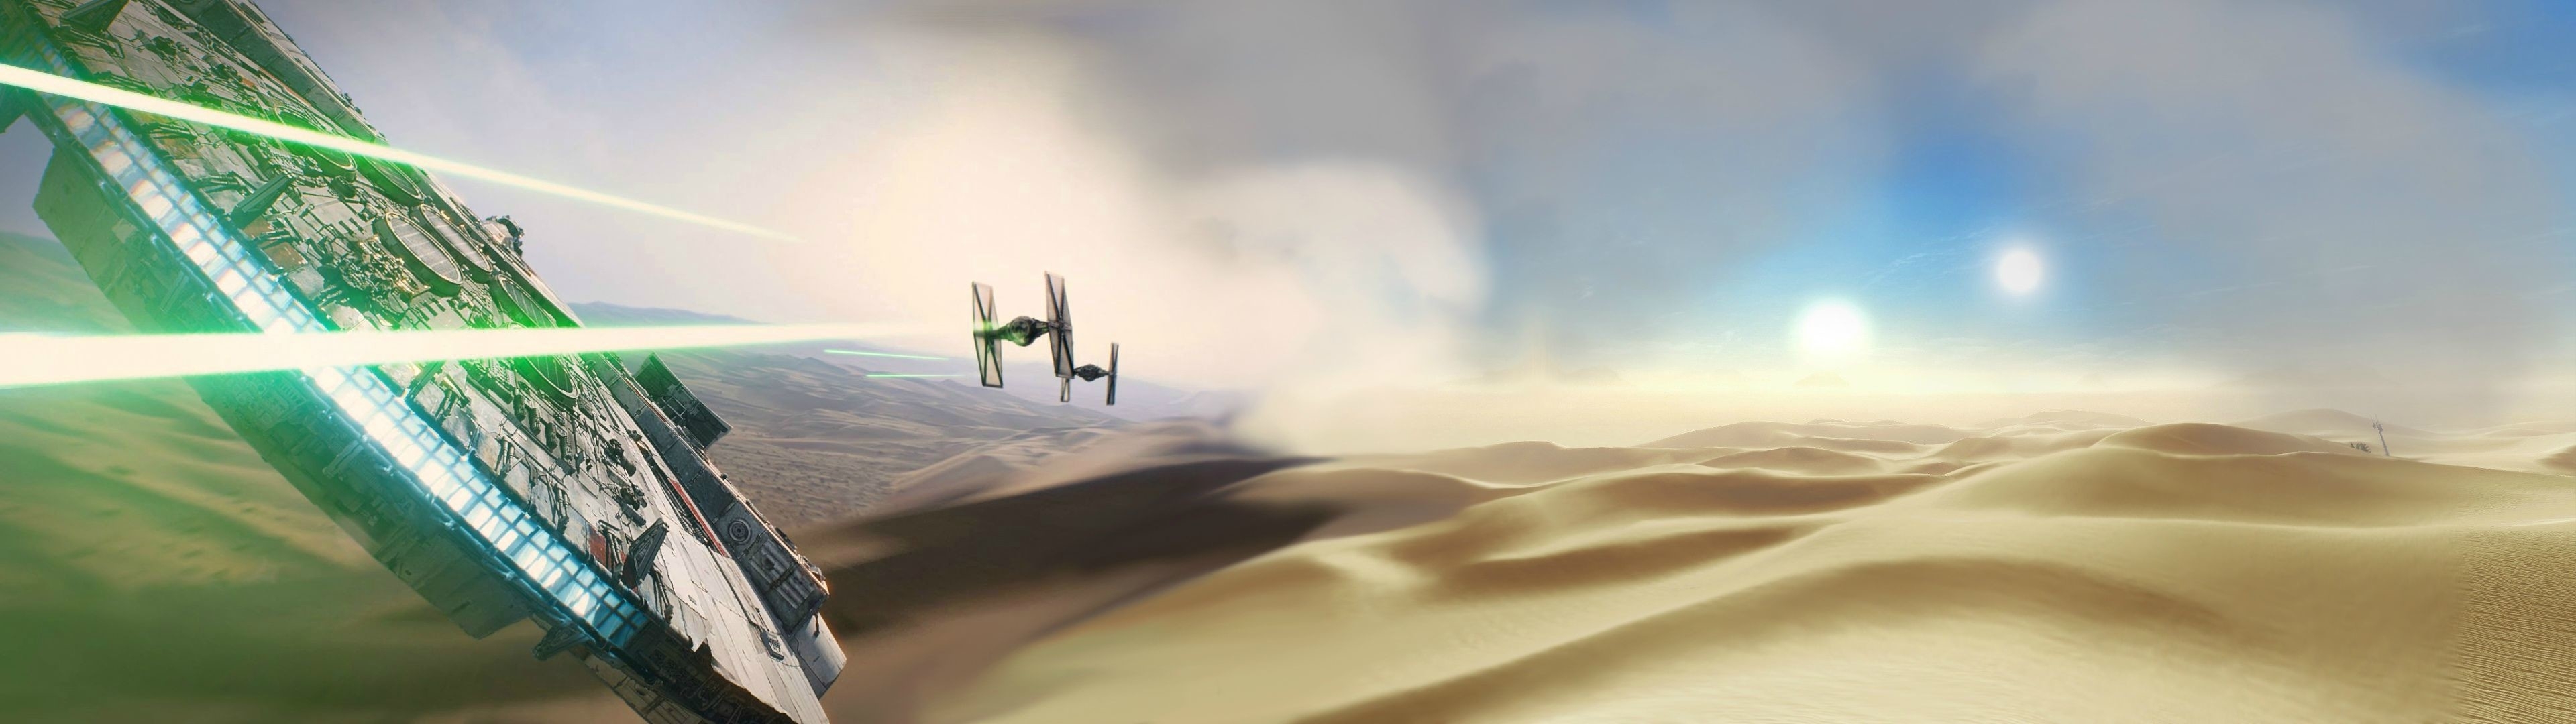 10 Top Star Wars Dual Monitor Wallpaper 3840X1080 FULL HD 1080p For PC Background